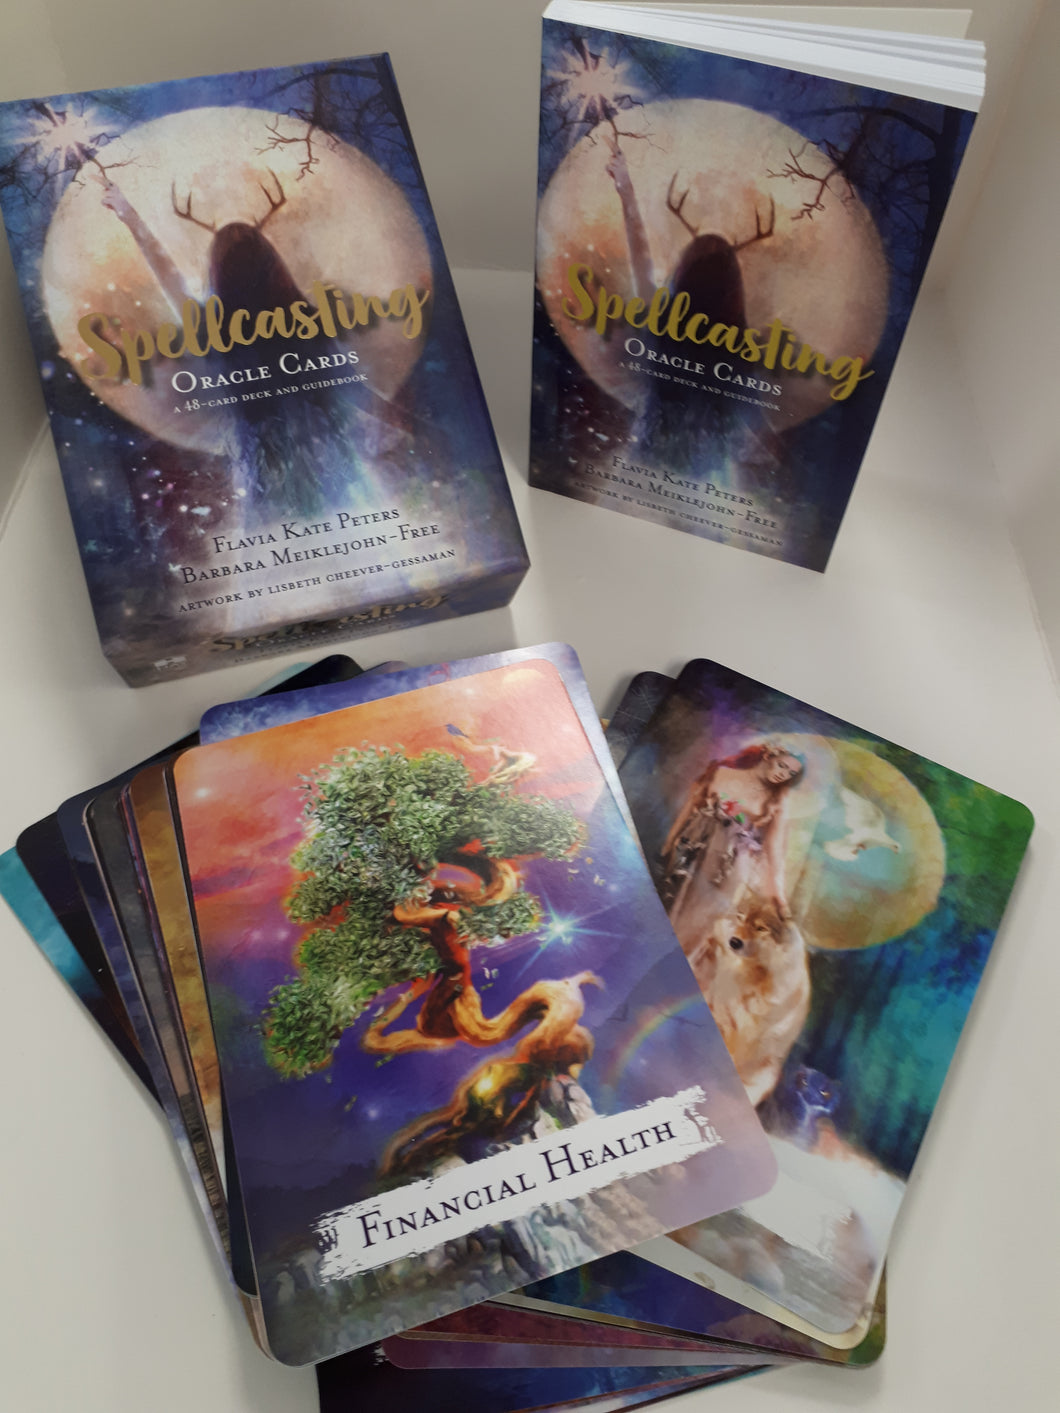 Spellcasting Oracle cards